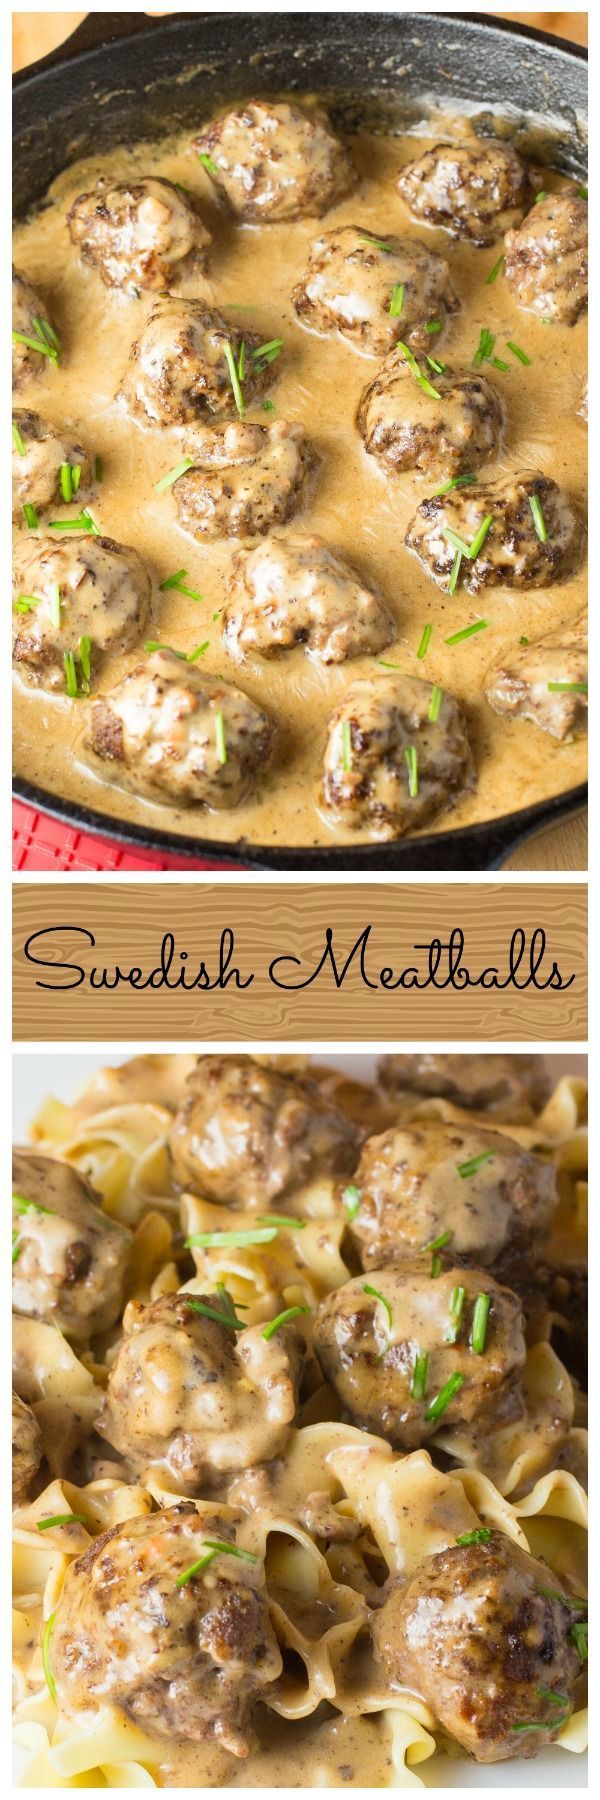 These meatballs are awesome! A super meatball recipe slathered in rich, creamy sauce.